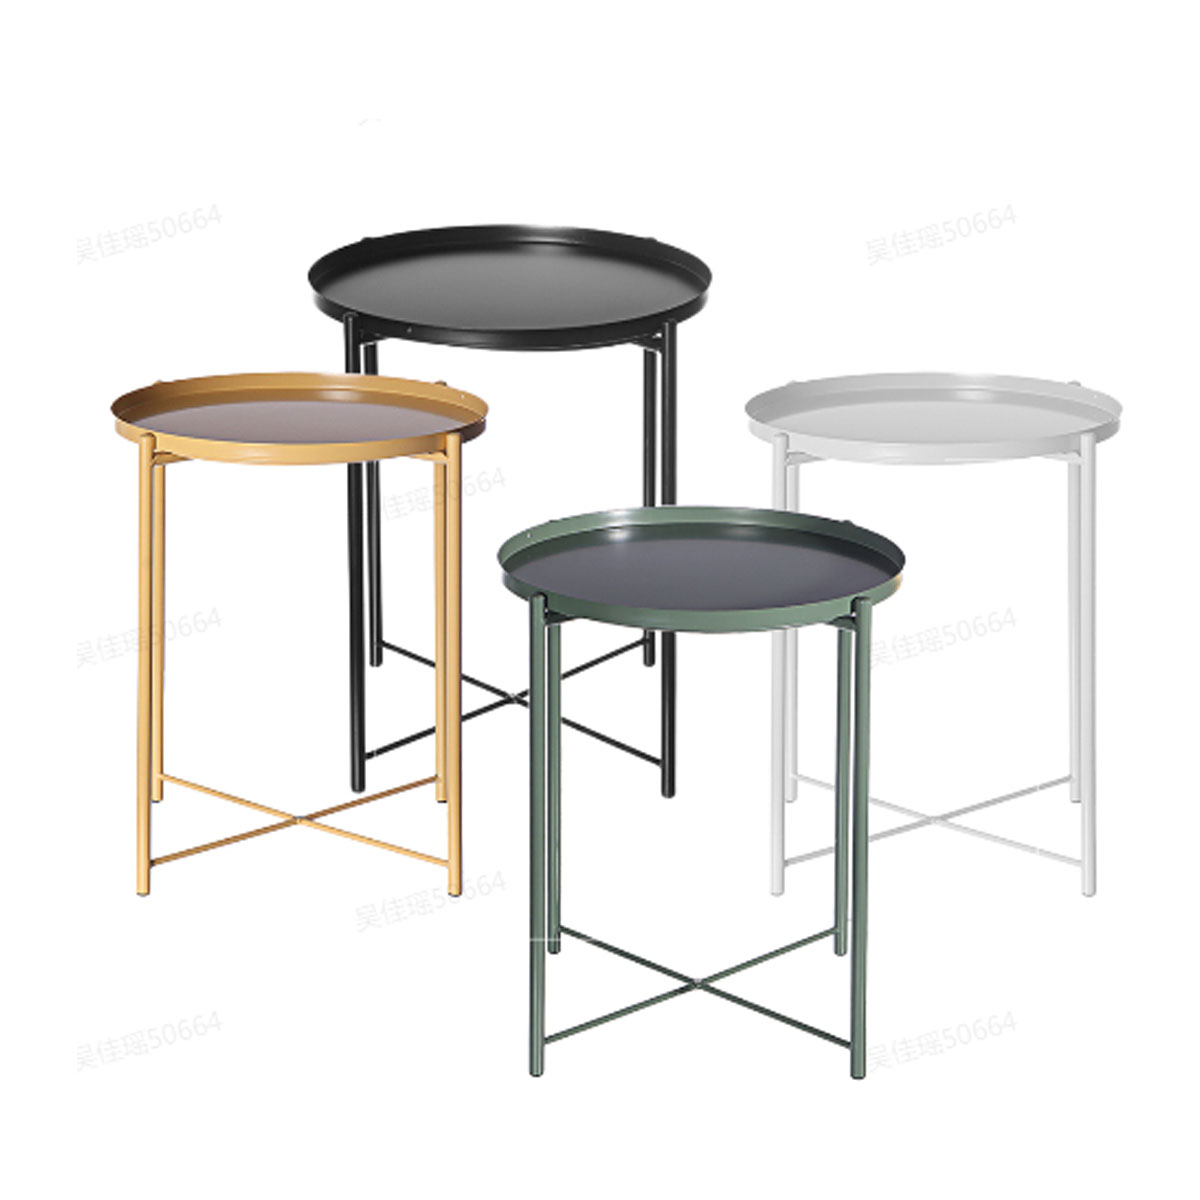 4452cm-Round-Side-End-Coffee-Table-Steel-Tray-Metal-Side-Desk-Furniture-for-Home-Bedside-Storage-Sup-1767827-11